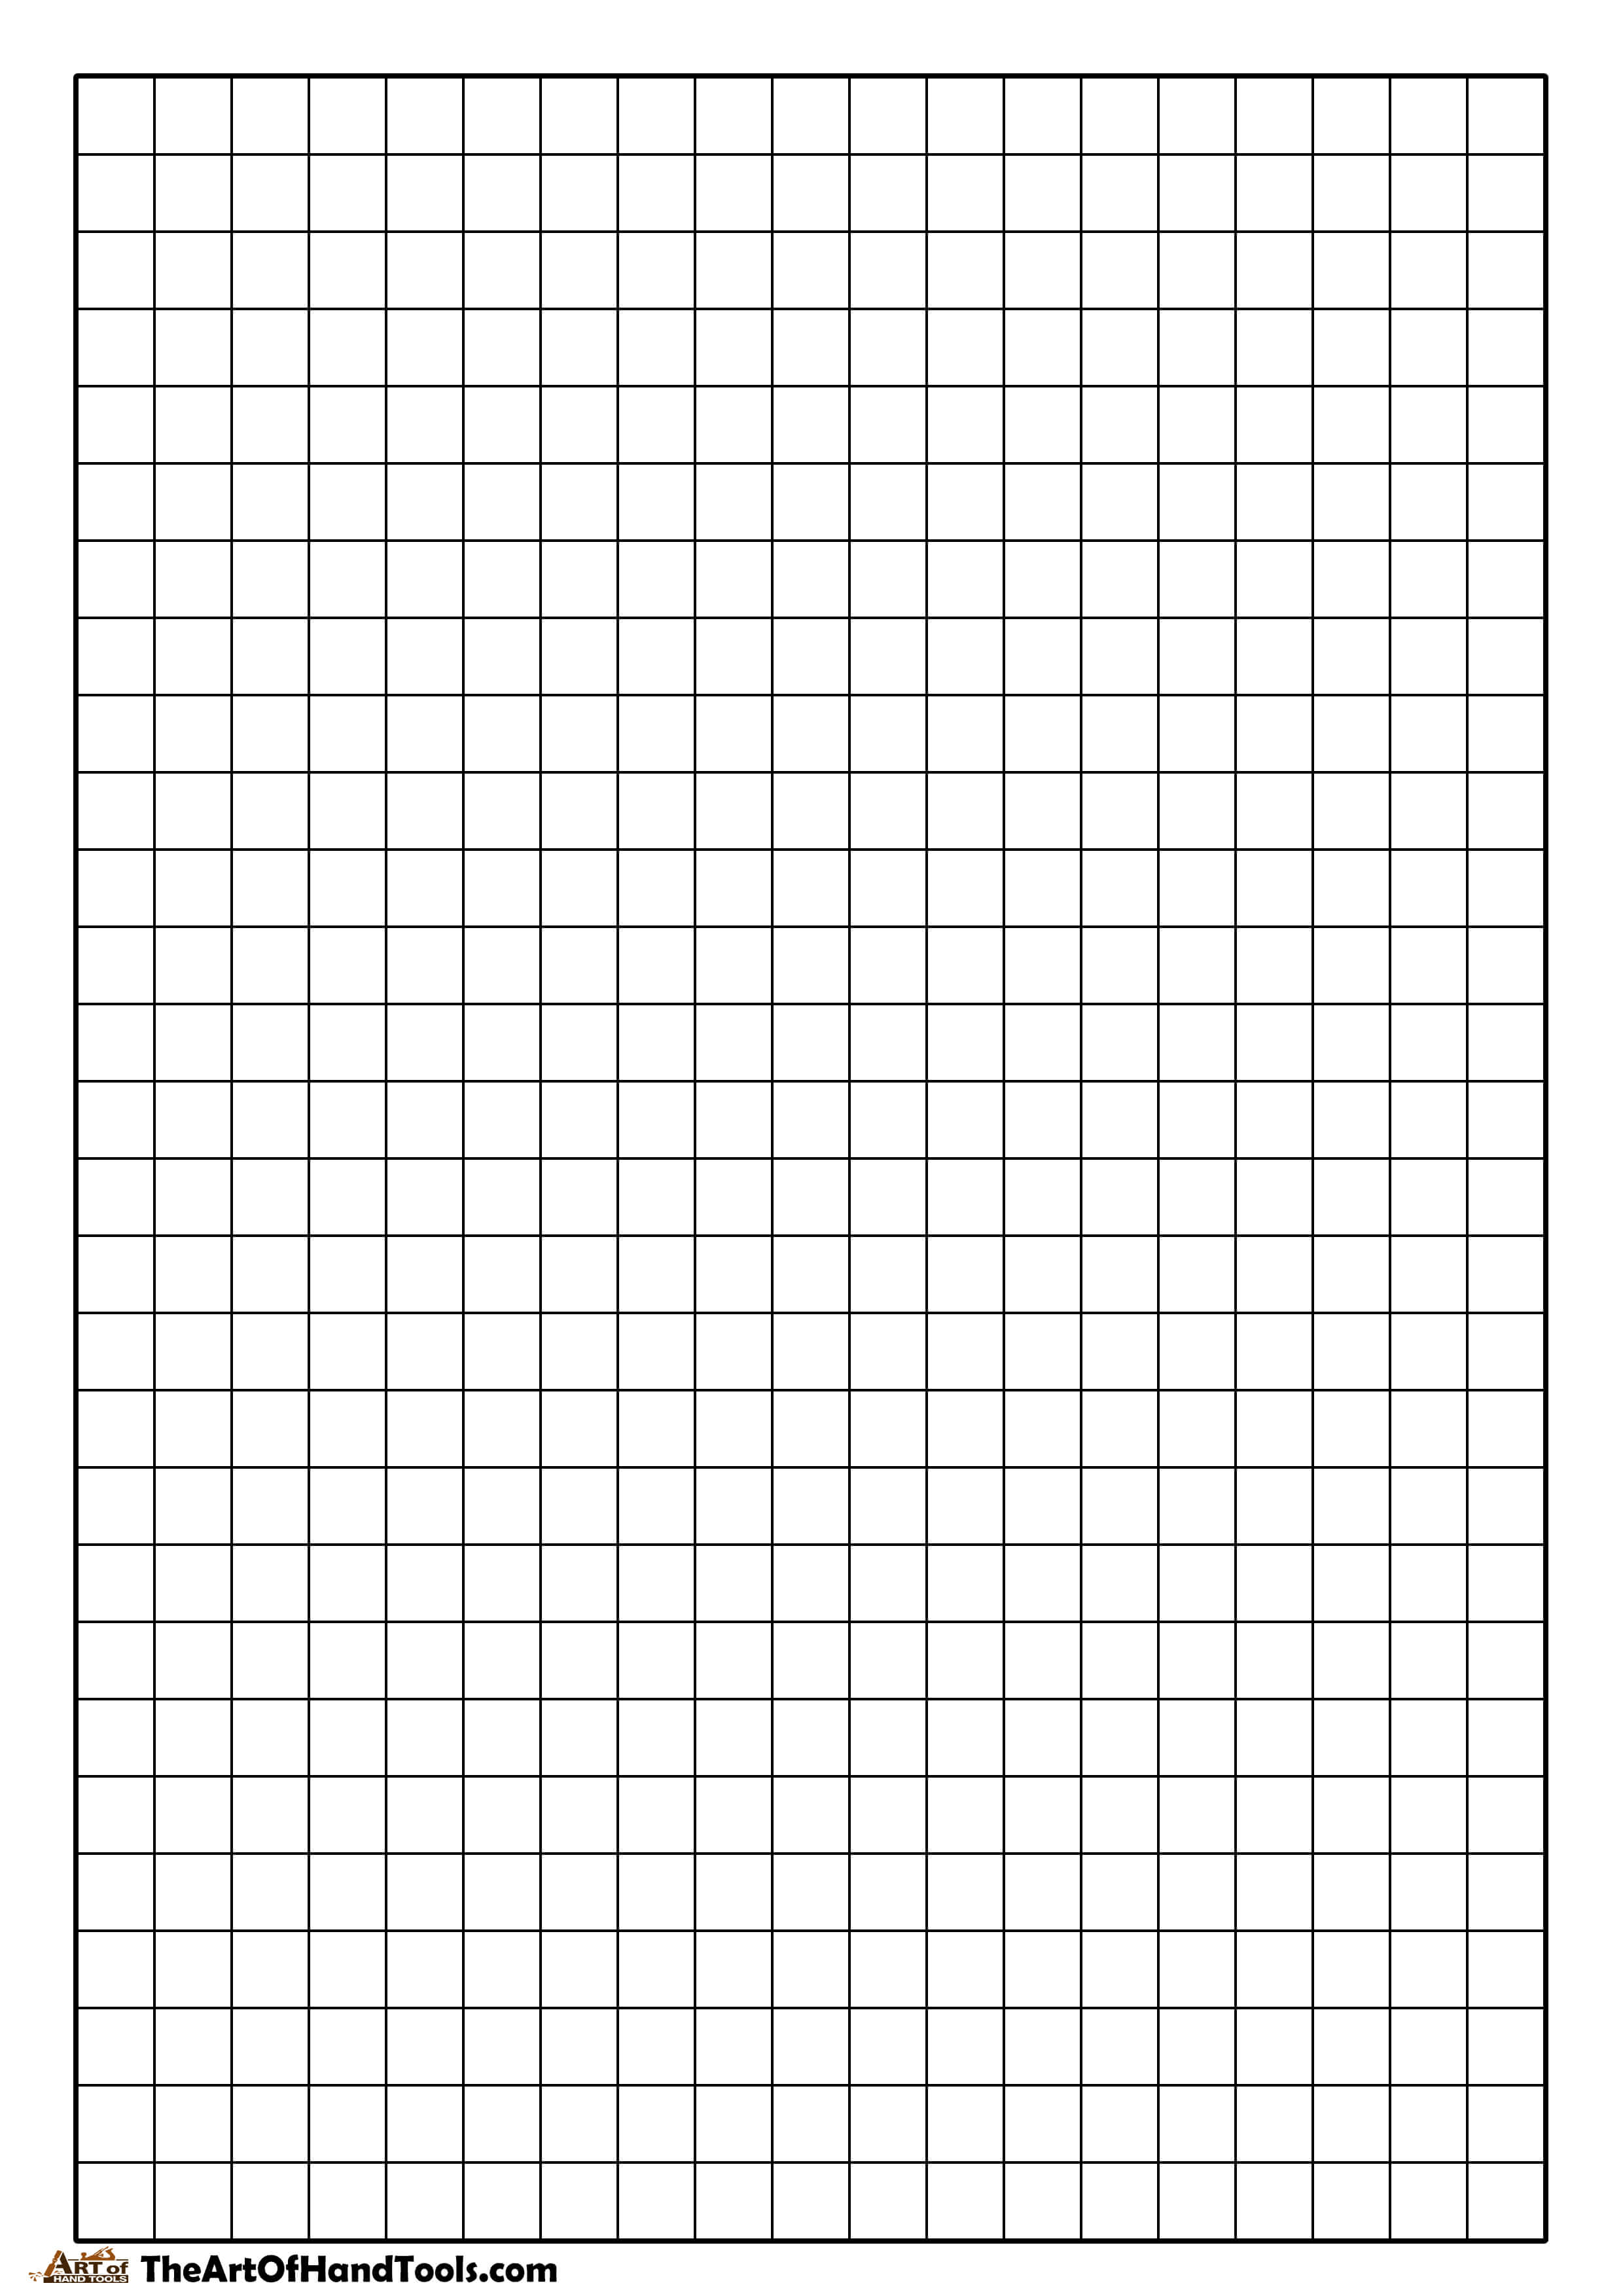 Blank Graph Paper Ready For Shop Layout. Head Over To The Within Blank Perler Bead Template